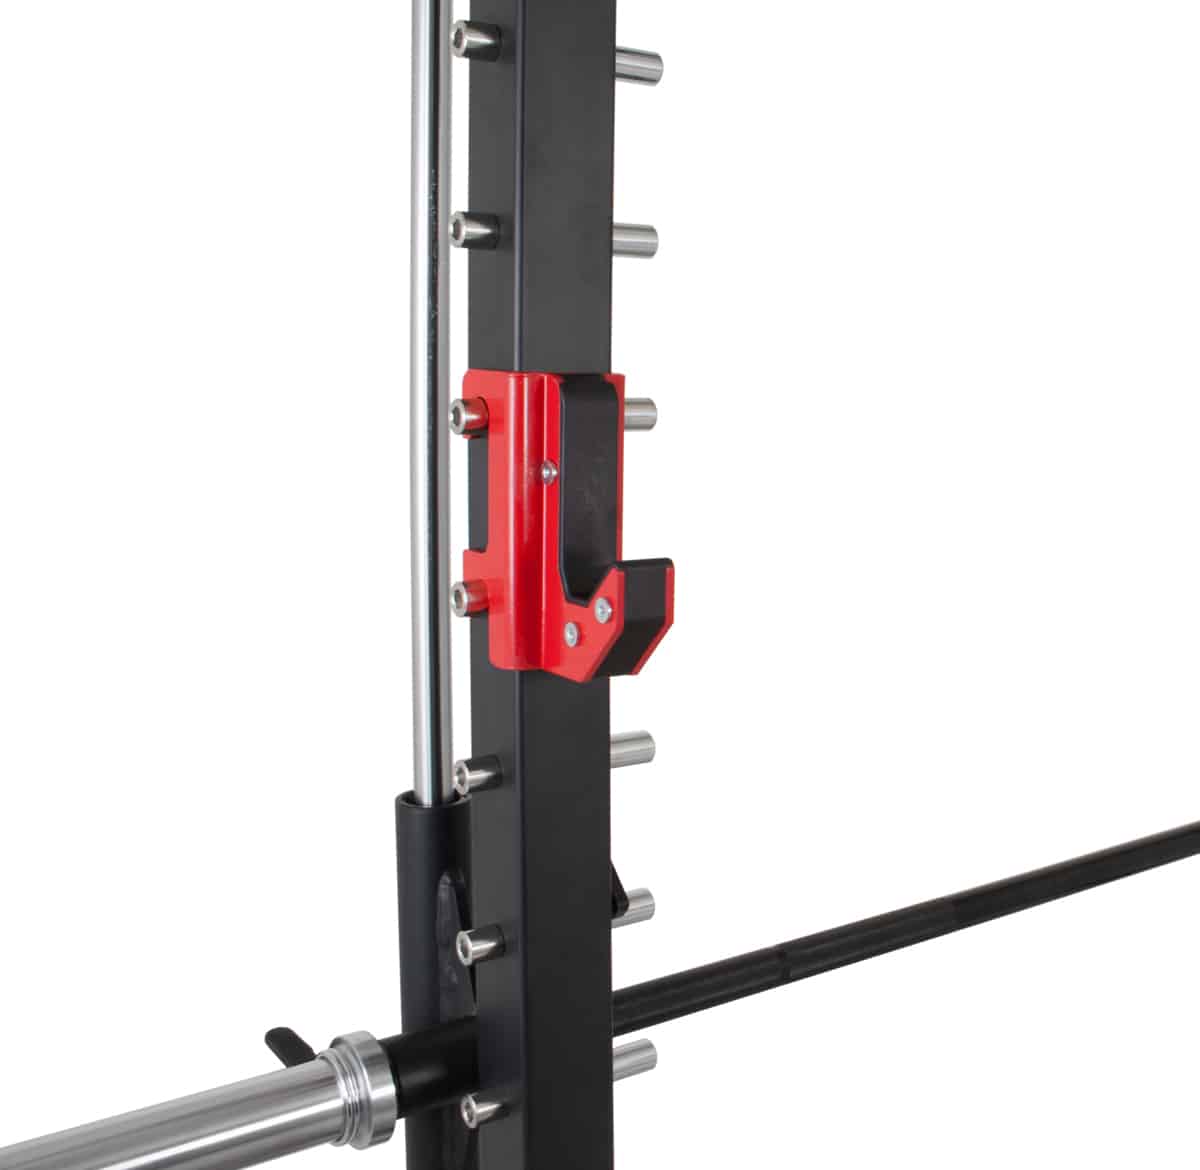 dkn-technology-linear-bearing-smith-machine-holder